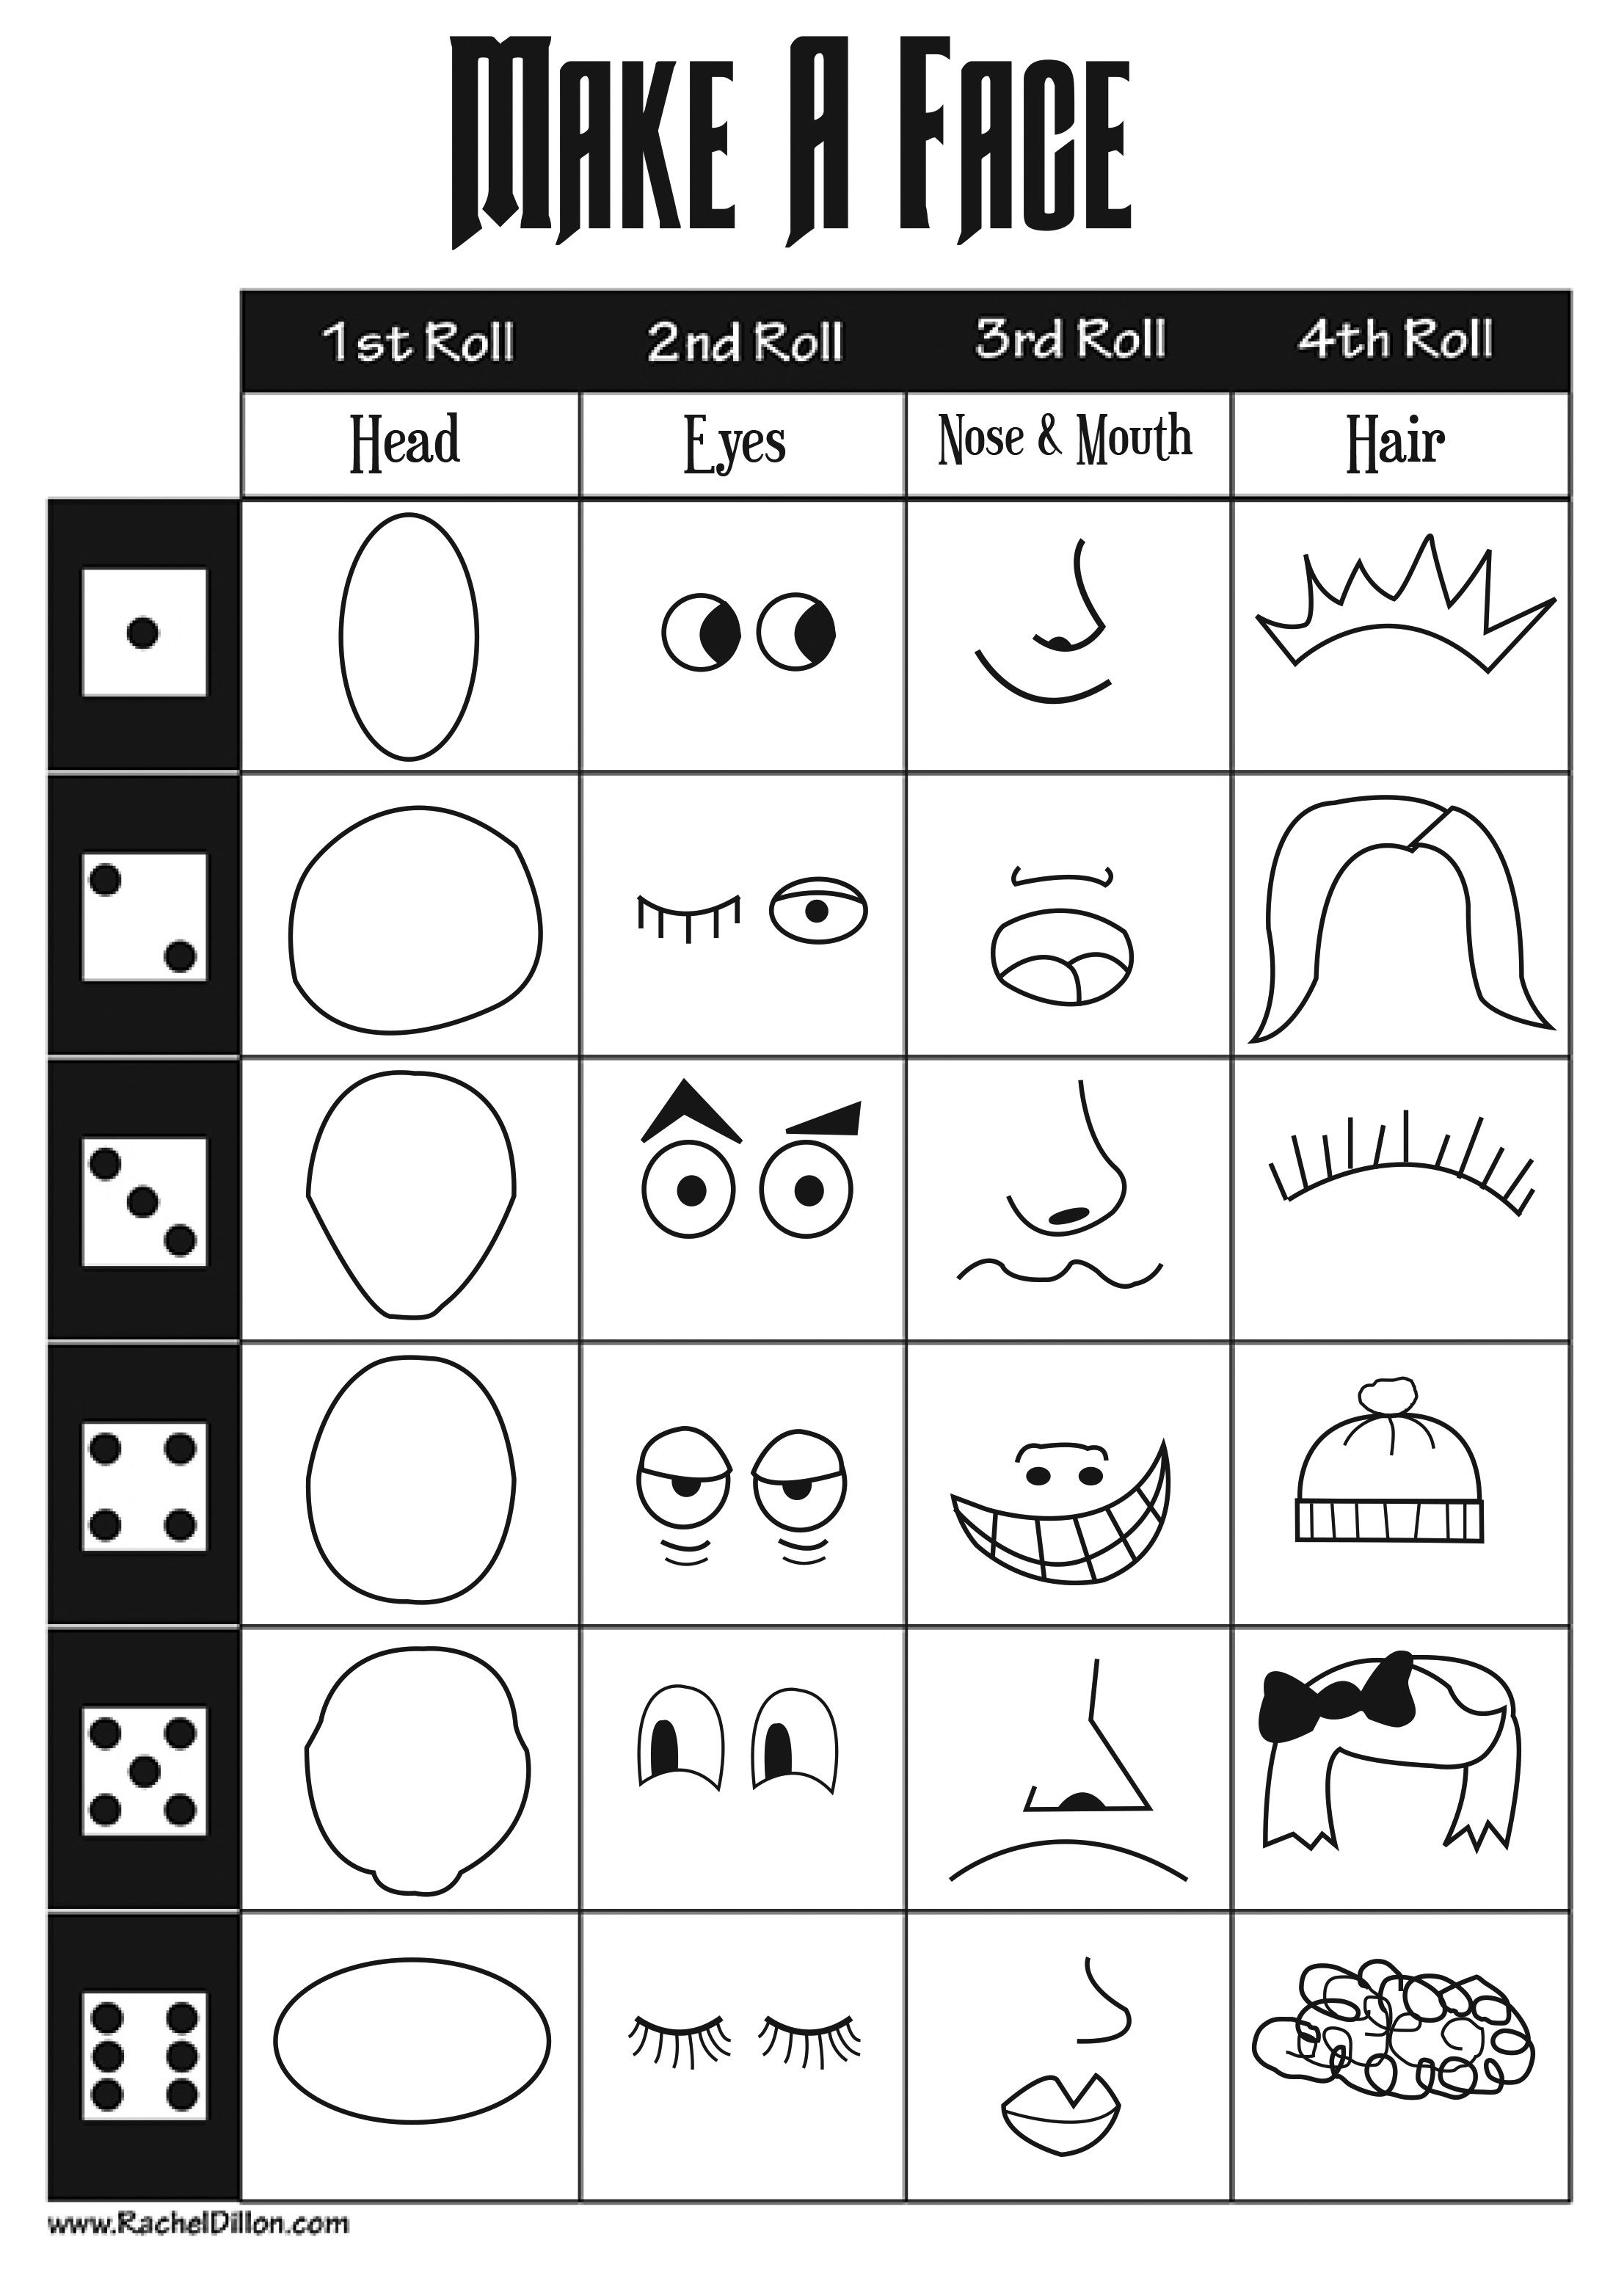 Make A Face Dice Game For Kids To Do. This Is Great To Keep Kids - Roll A Monster Free Printable